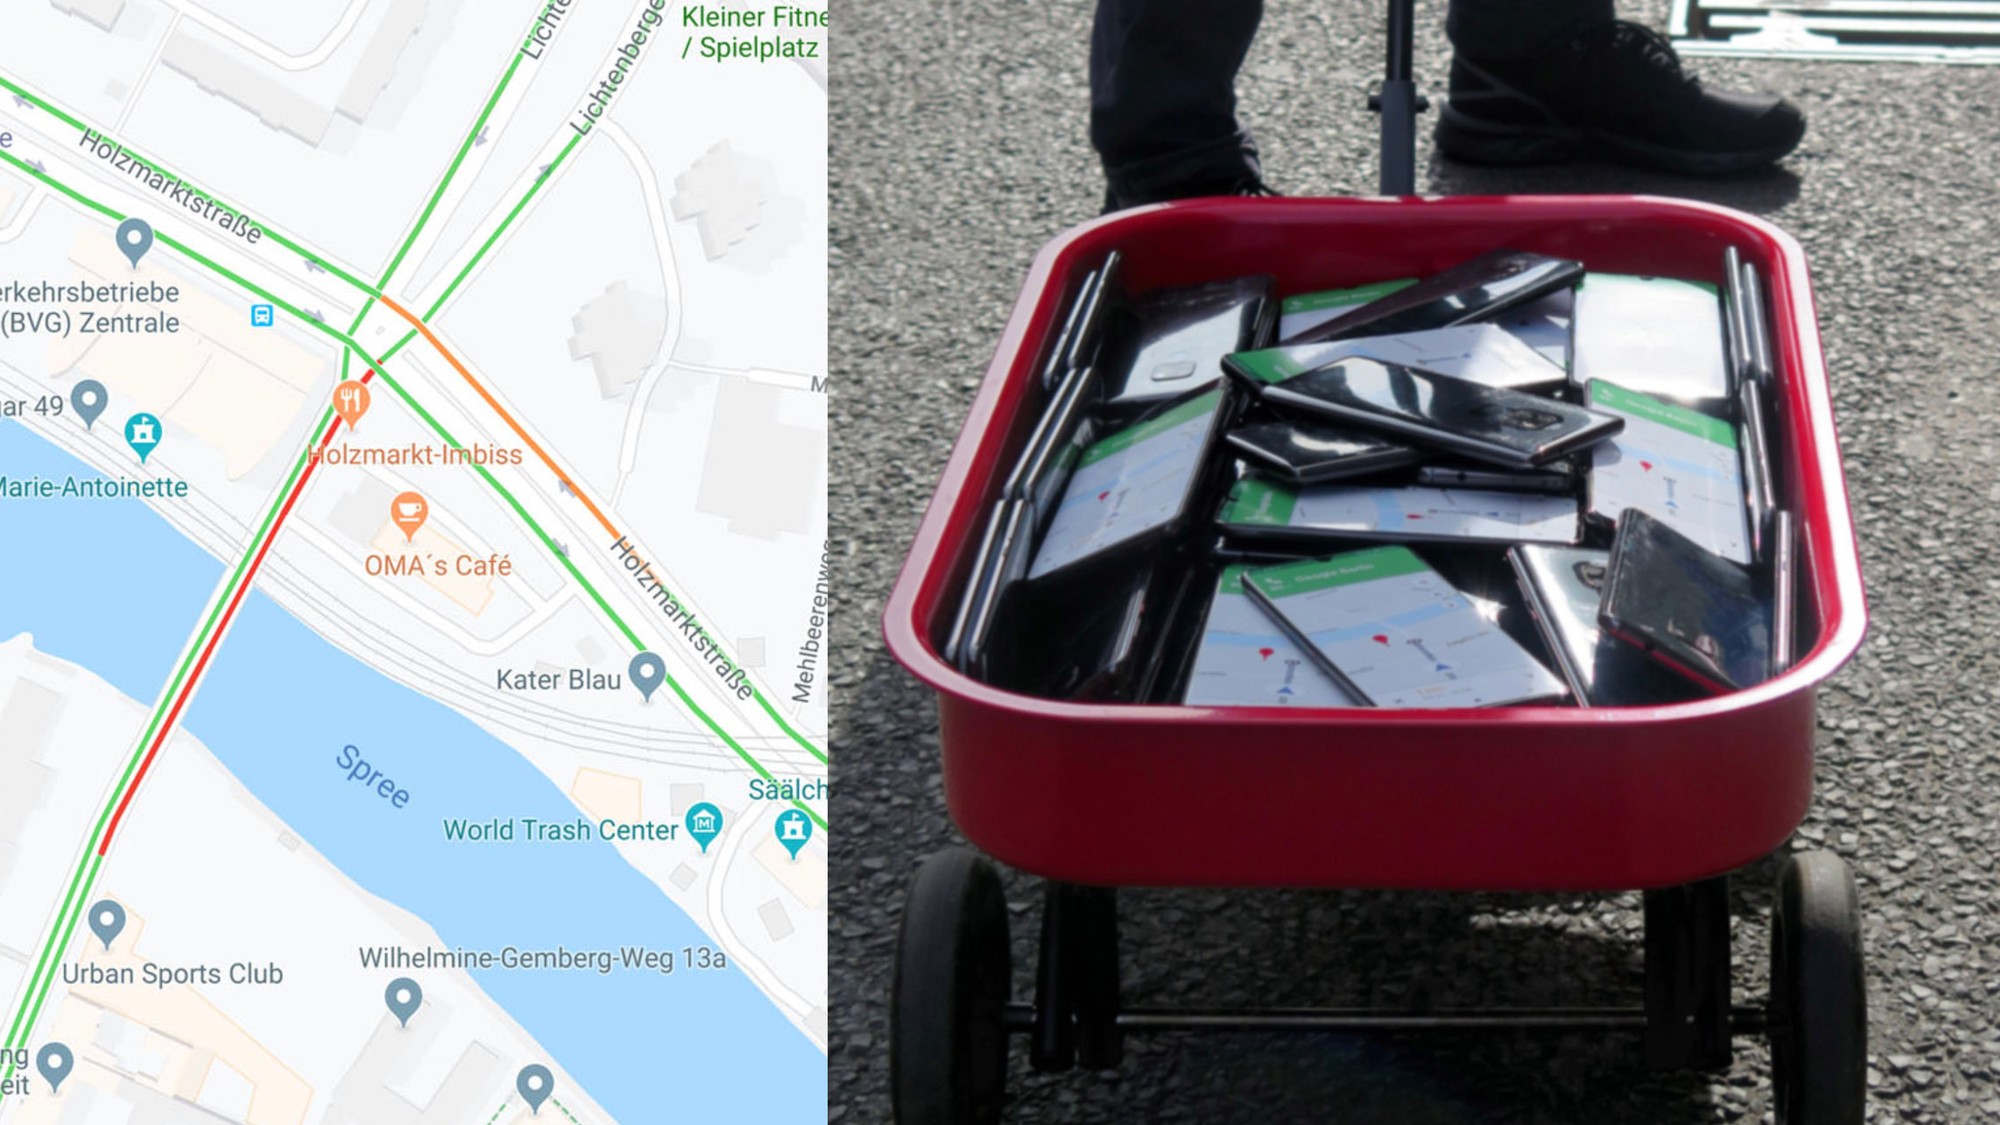 Afbeeldingsresultaat voor This Man Created Traffic Jams on Google Maps Using a Red Wagon Full of Phones